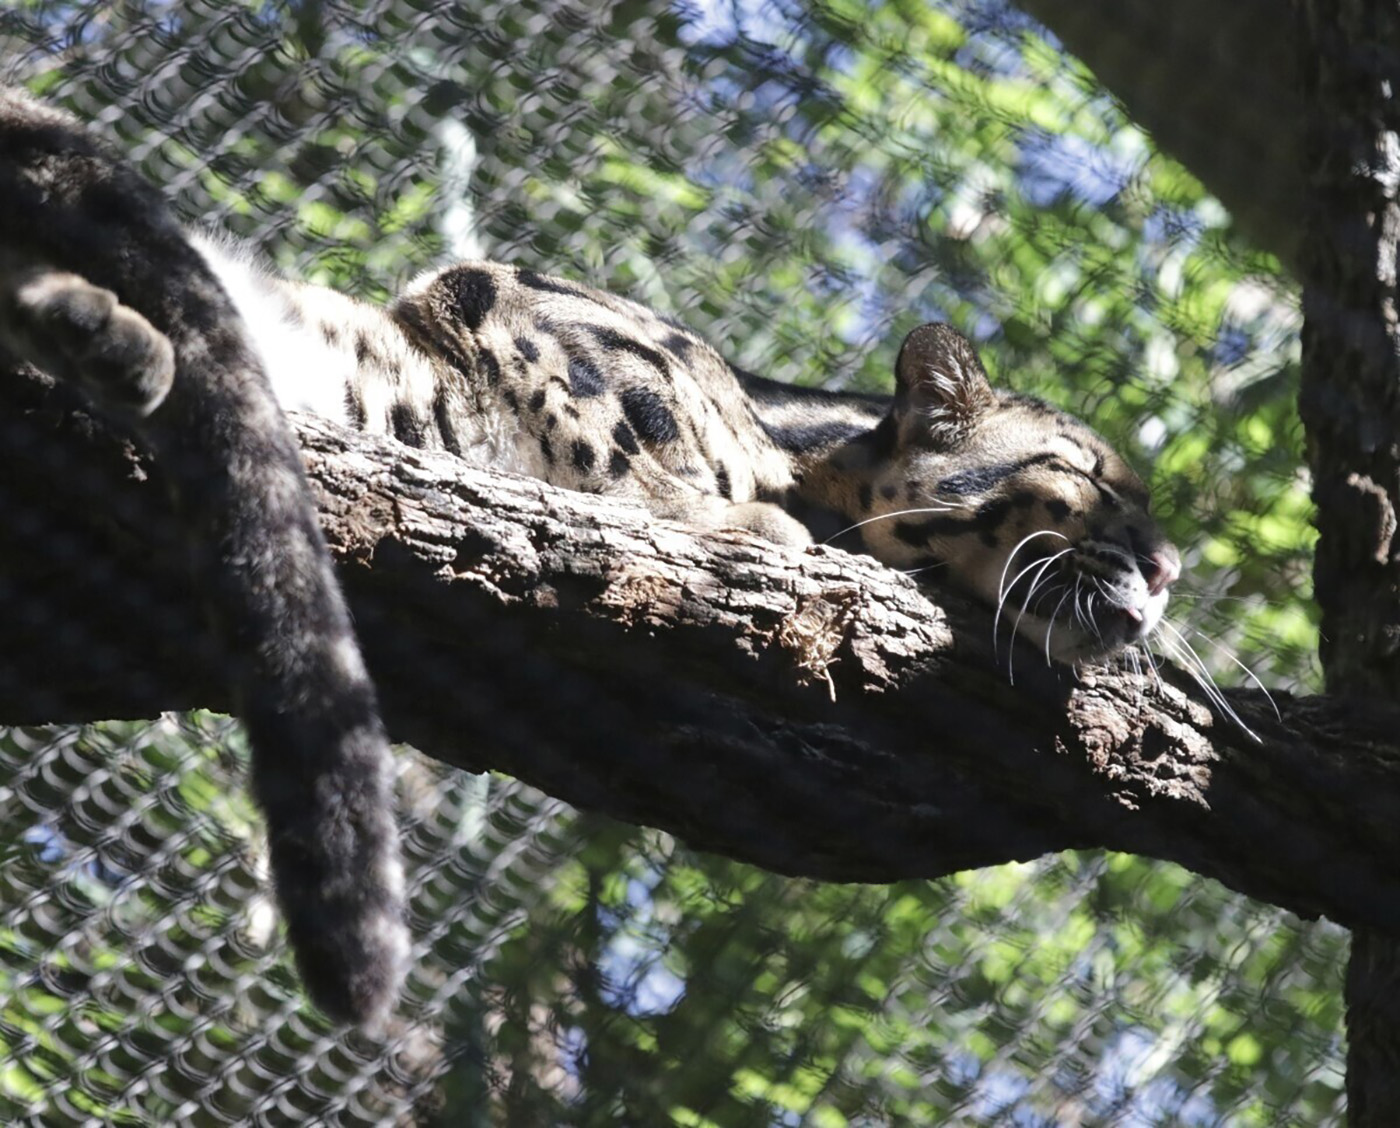 PHOTO: A clouded leopard named Nova rests on a tree limb in an enclosure at the Dallas Zoo. Nova went missing on Friday, Jan. 13, 2023 and the zoo was shut down as a result.